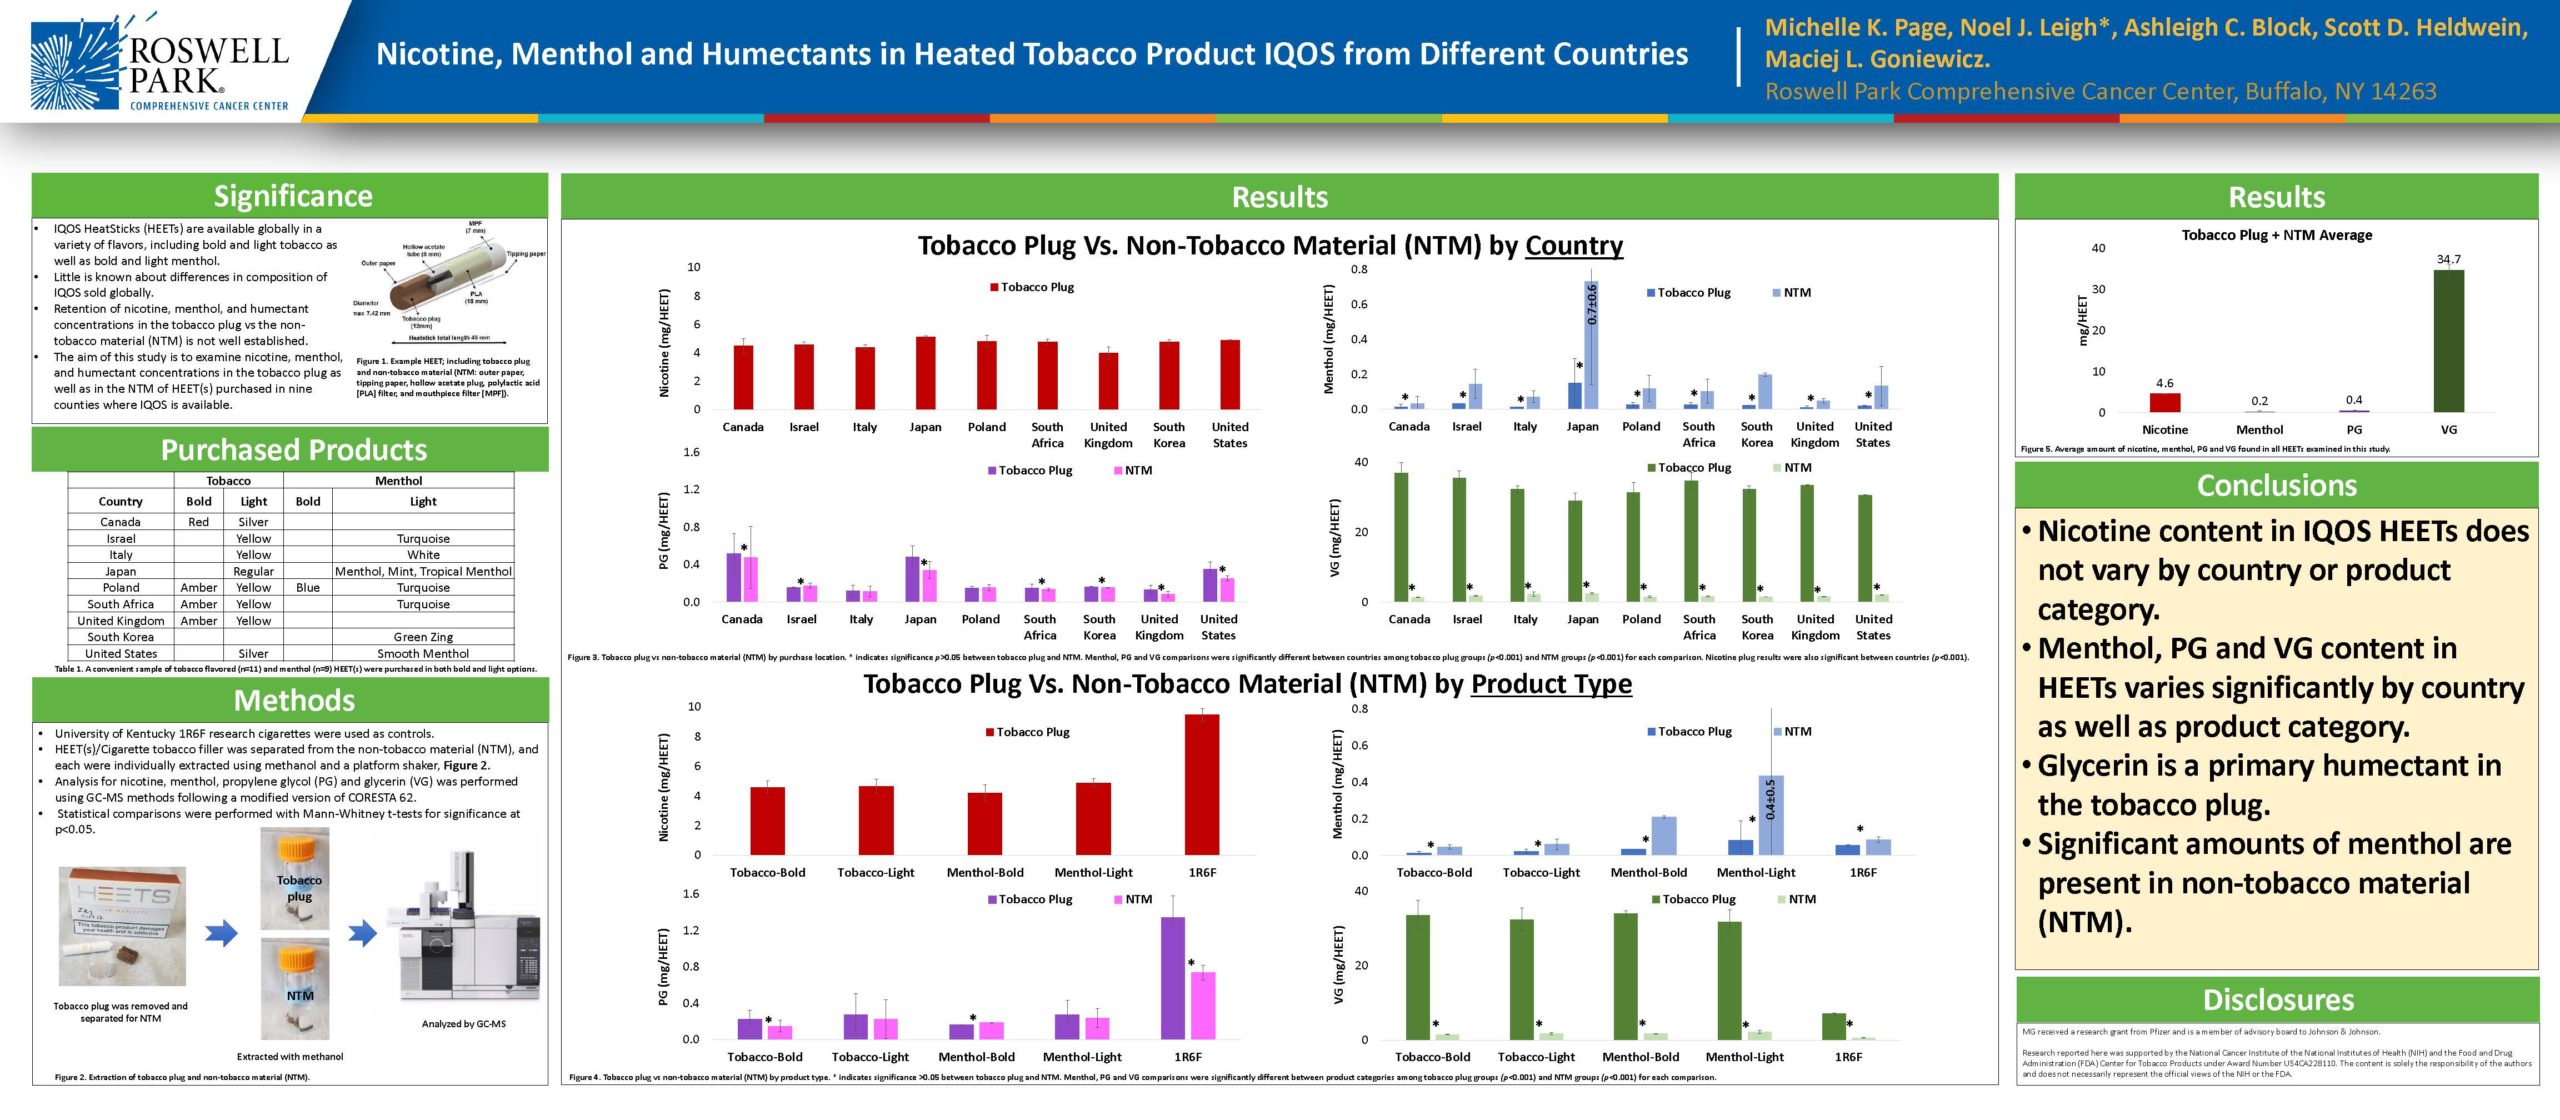 Nicotine, Menthol and Humectants in Heated Tobacco Product IQOS f rom Different Countries